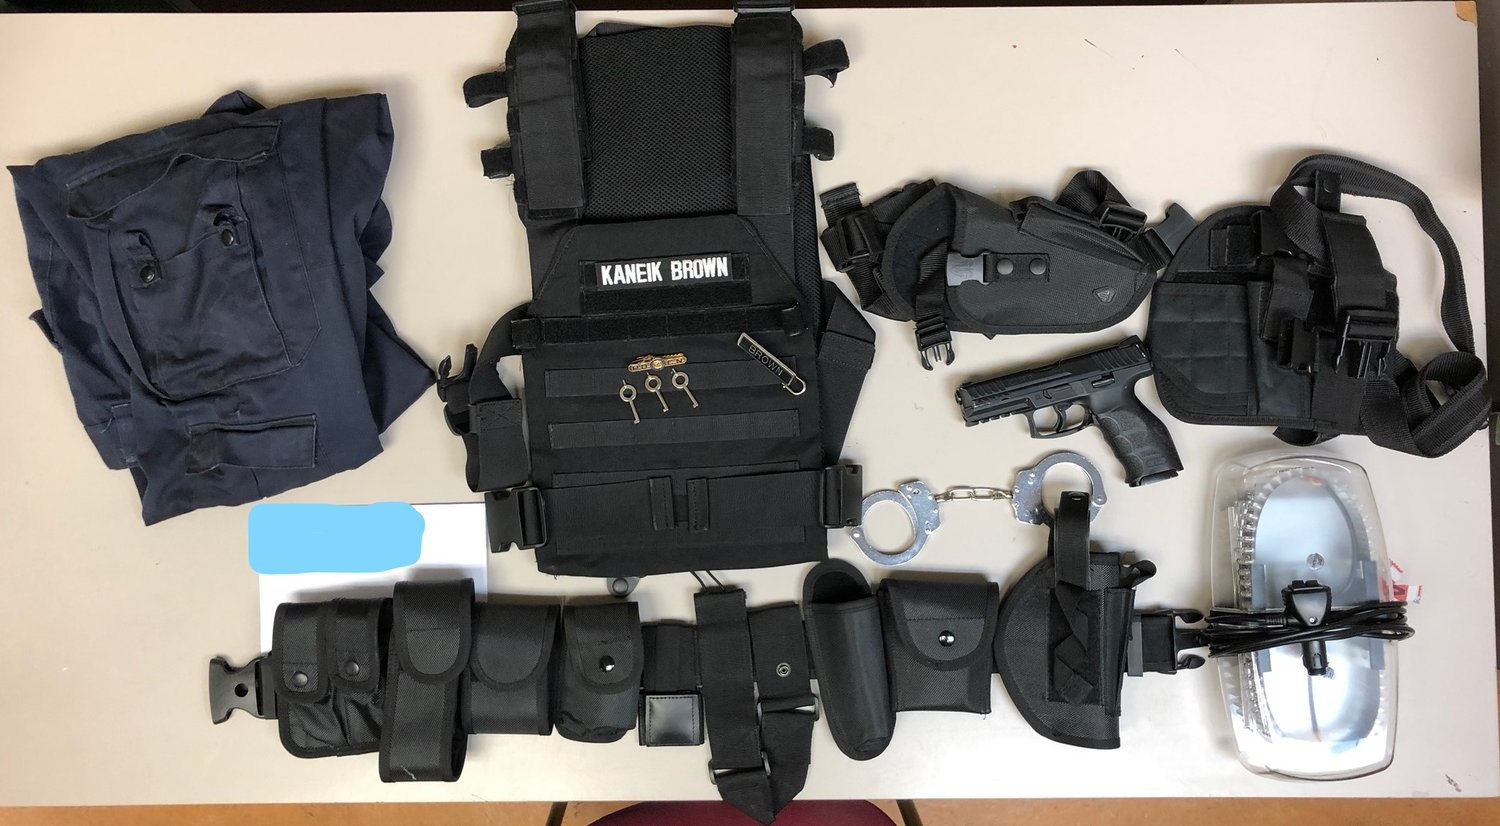 Police said they discovered a number of items from the suspect's car including a duty belt, handcuff keys and a BB gun, after he claimed to be a Nassau County police officer.